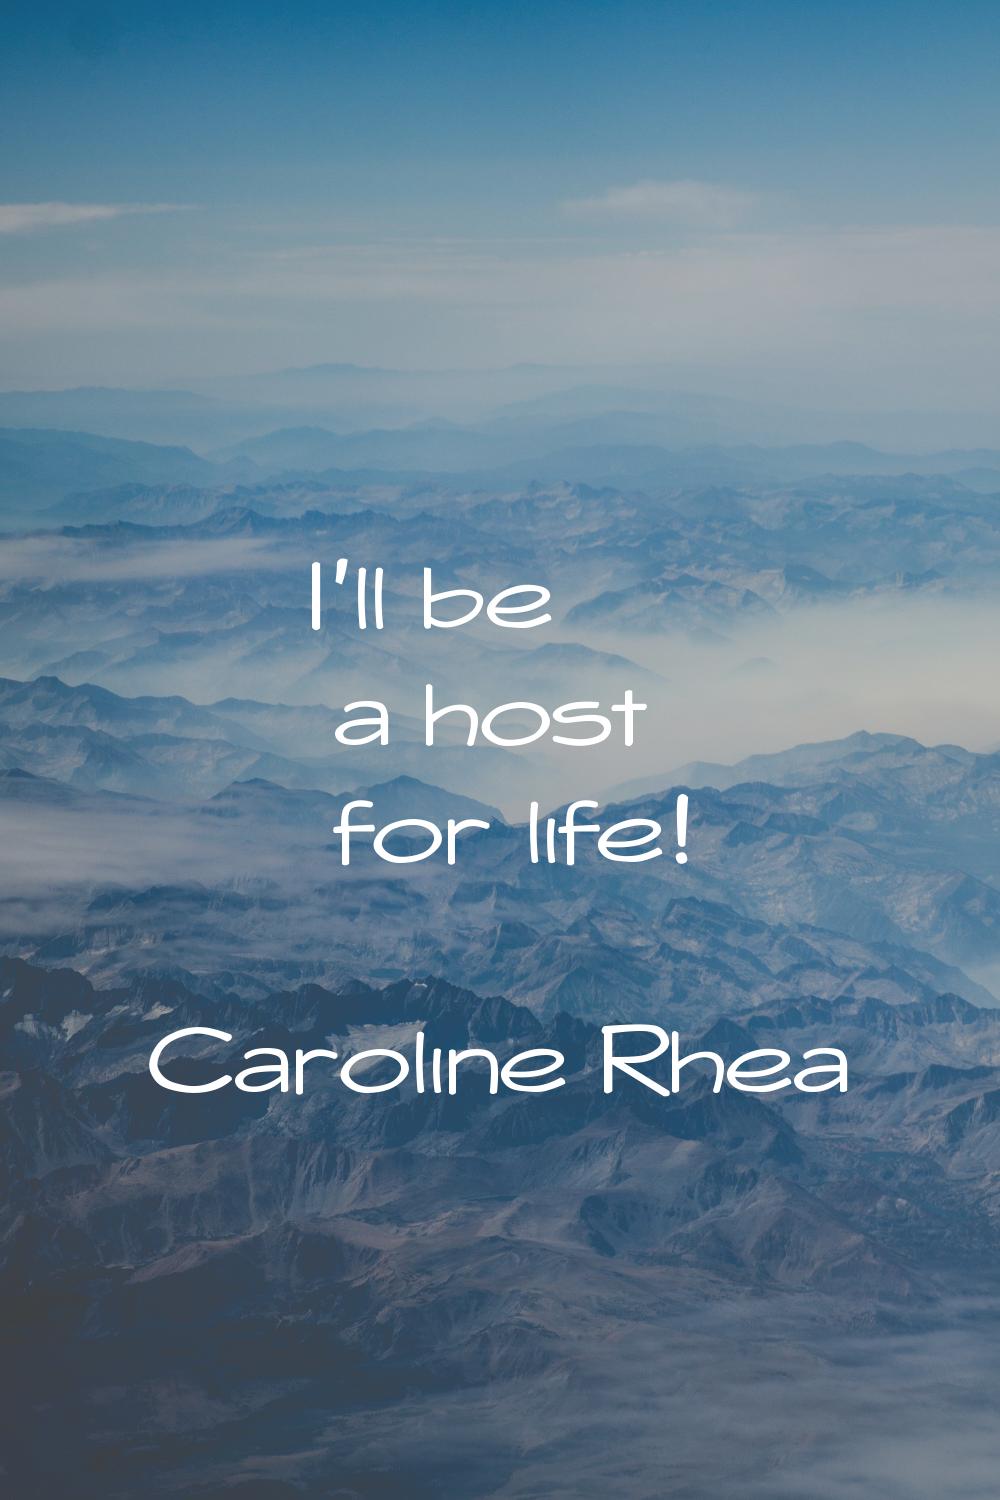 I'll be a host for life!